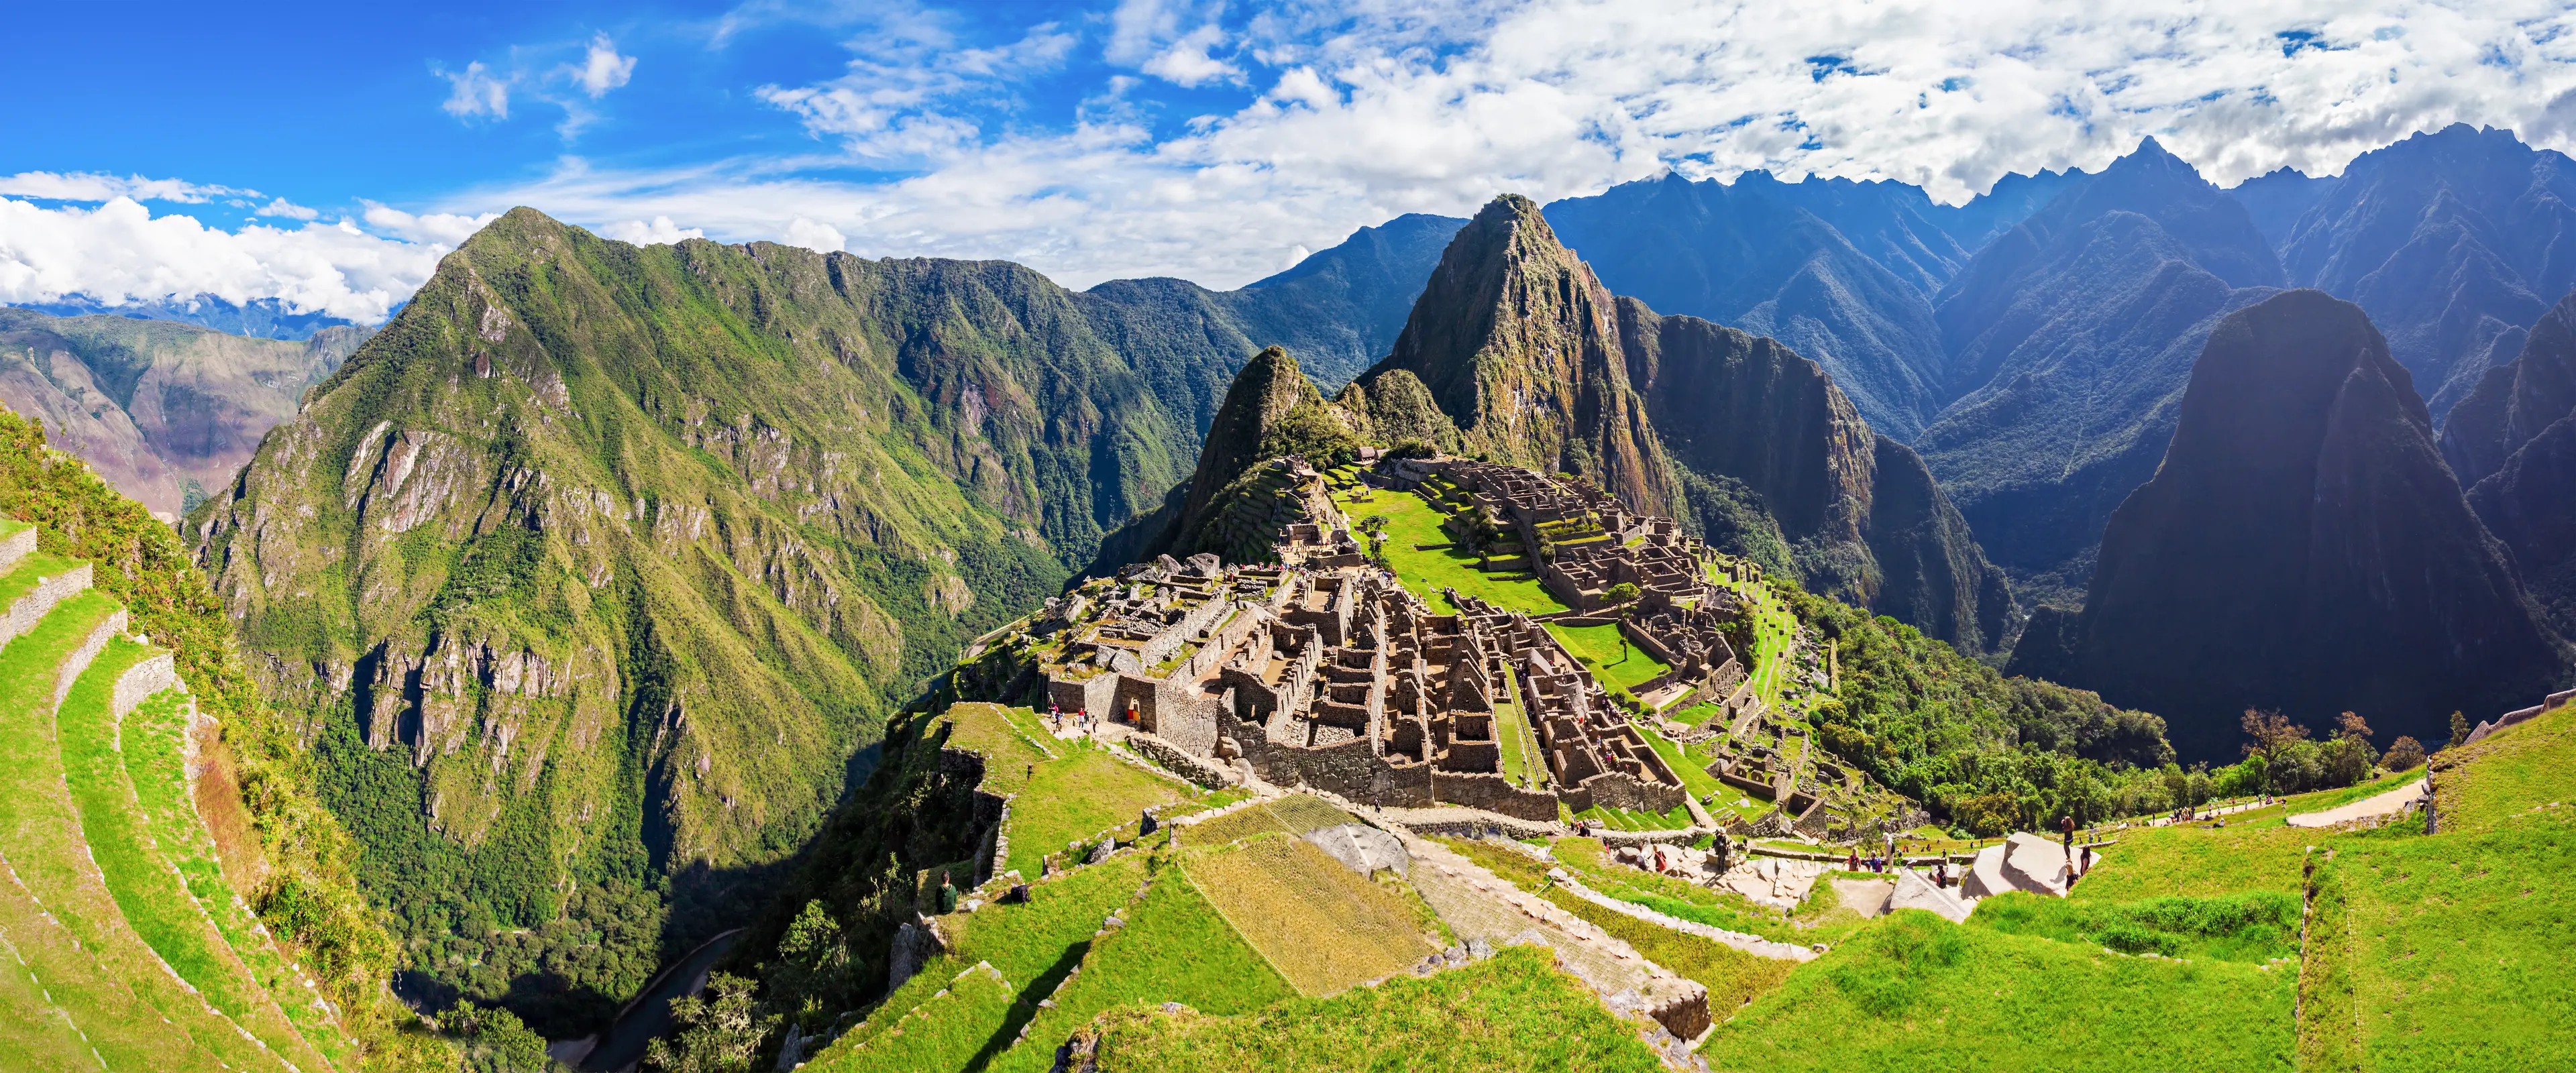 3-Day Local Family Experience: Machu Picchu Relaxation, Sights, & Cuisine